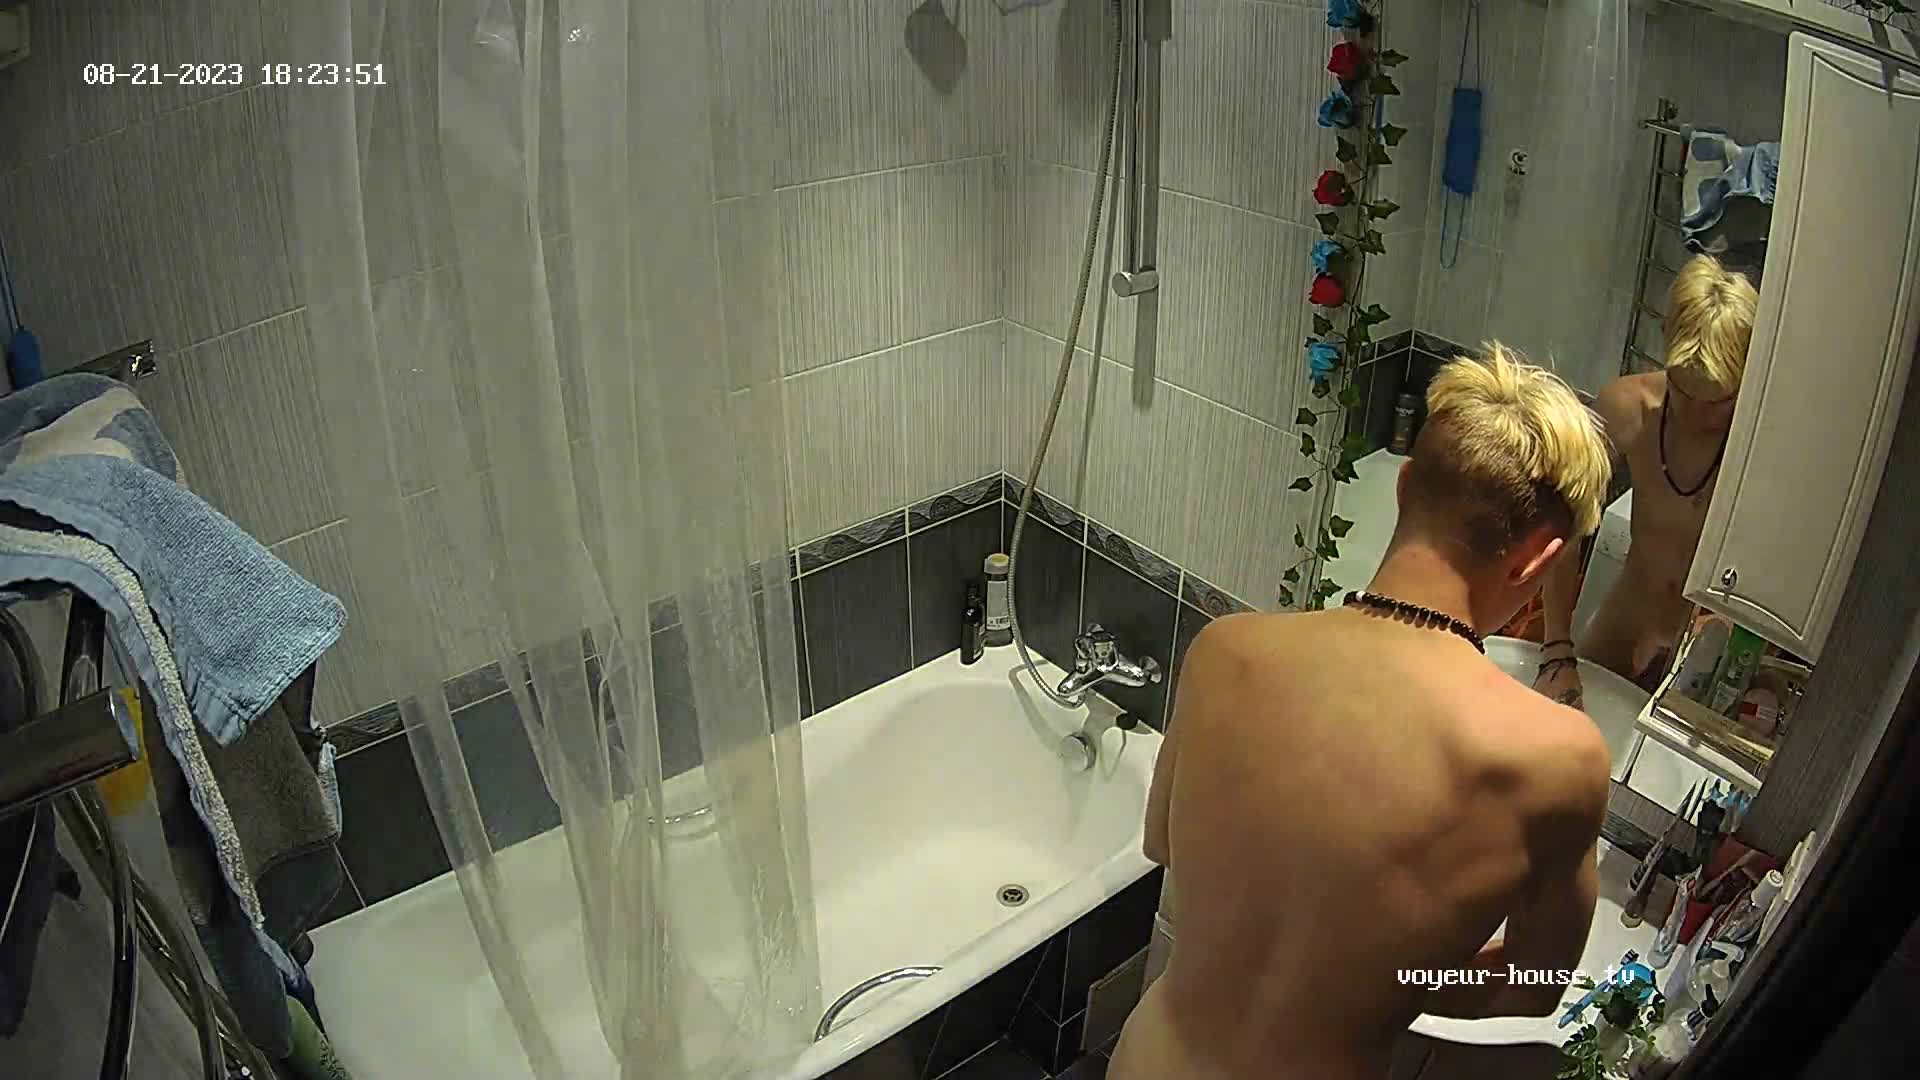 Guest guy washing cock before sex 21-08-2023